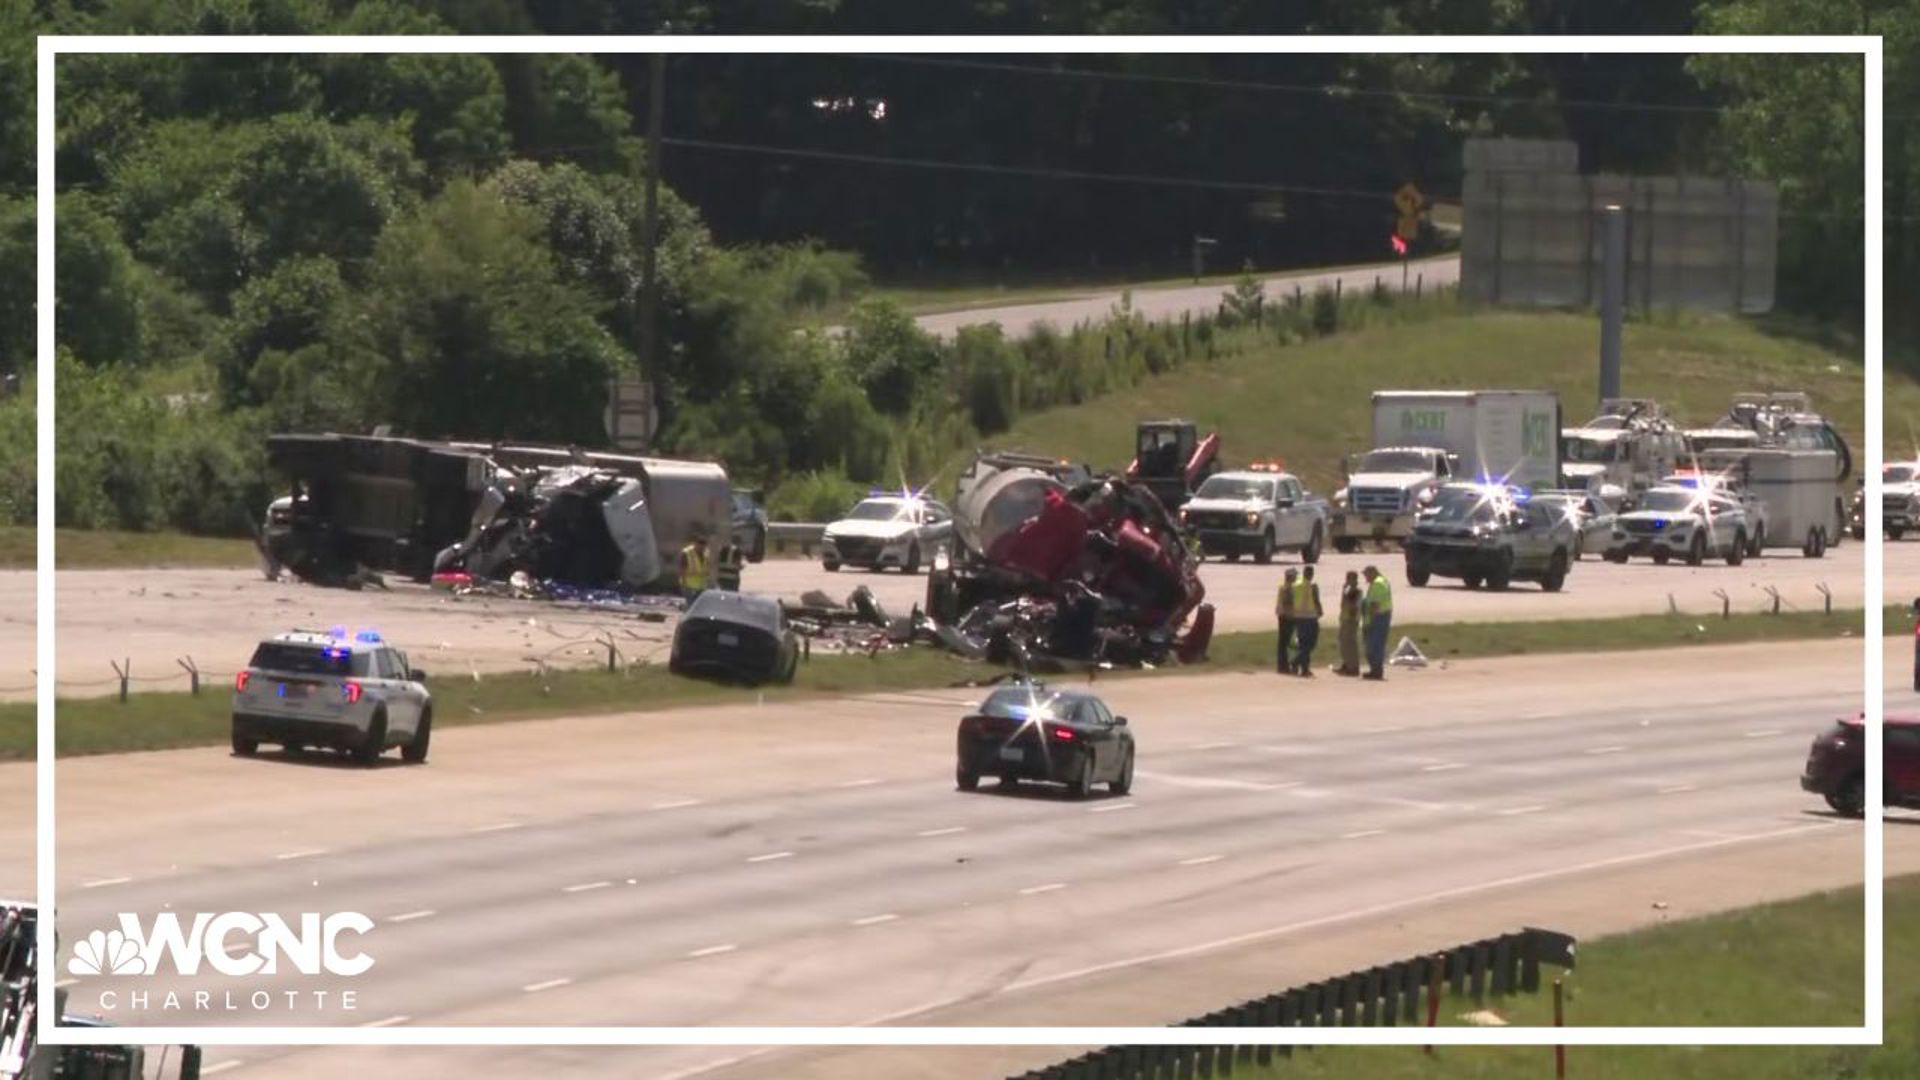 One person died and another was airlifted in critical condition when two tractor-trailers crashed on I-485 in north Charlotte on Friday morning.